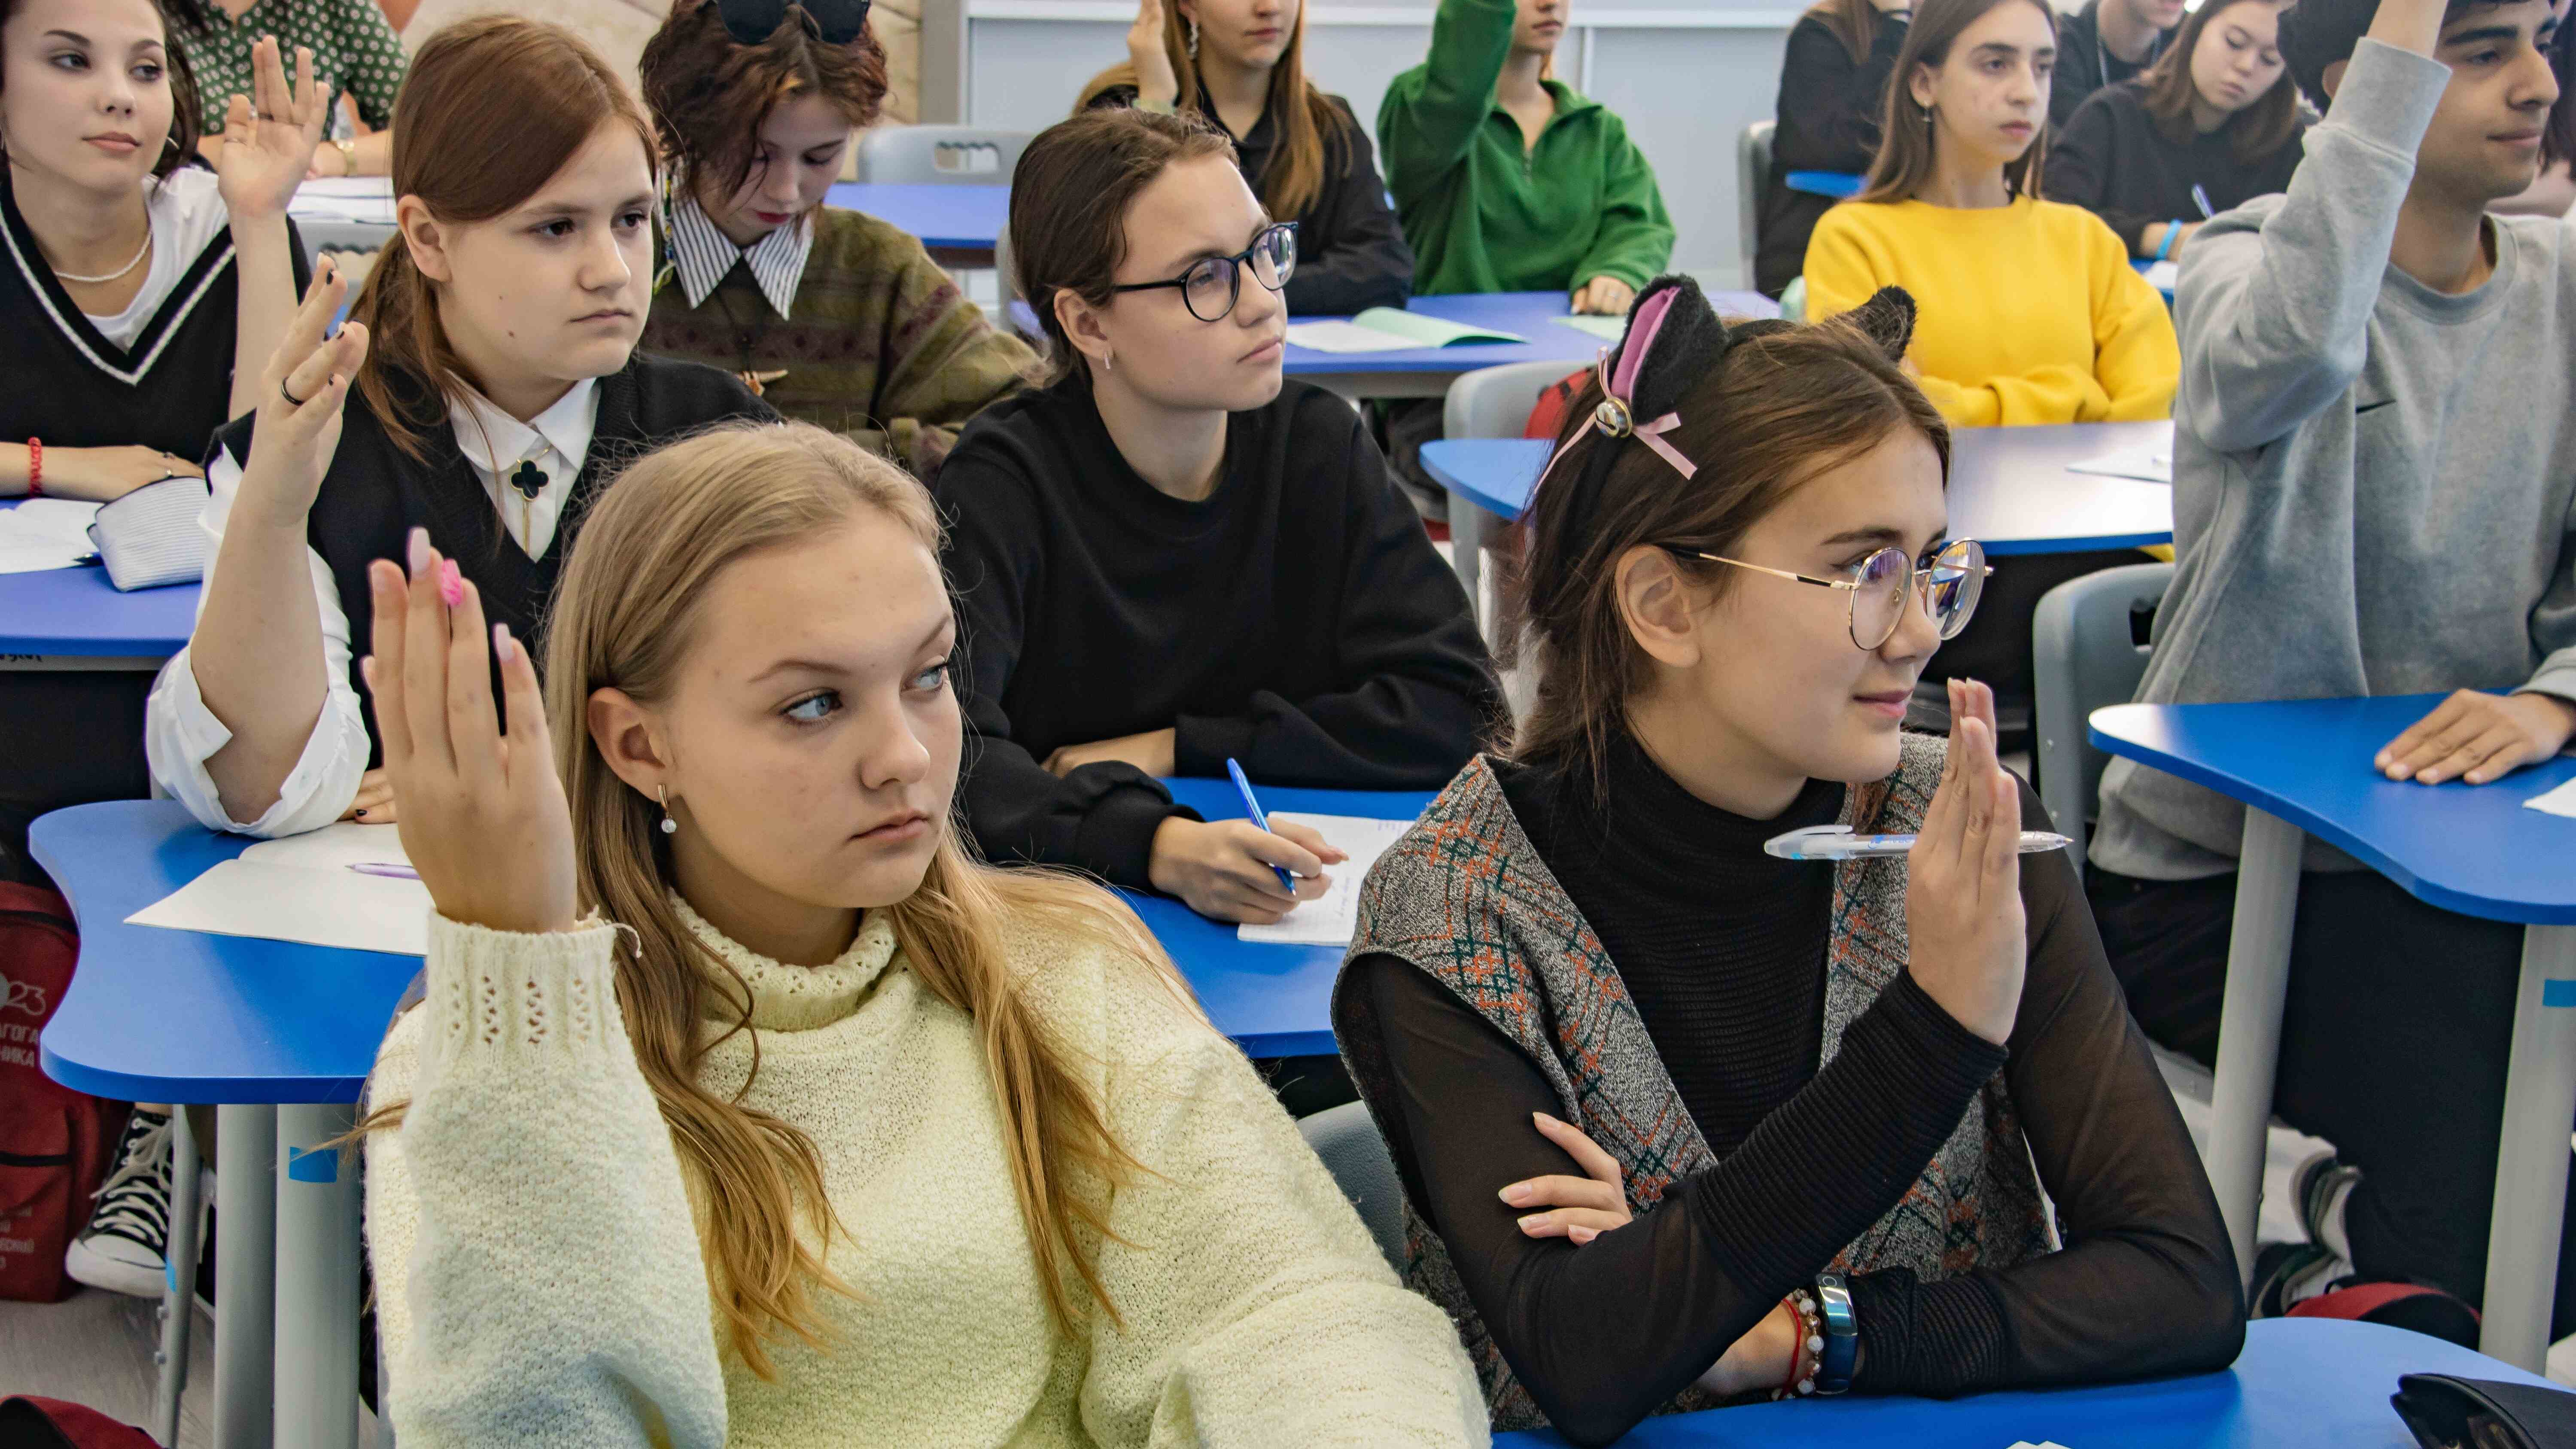 The III All-Russian Youth Pedagogical Forum ended in “Orlyonok”